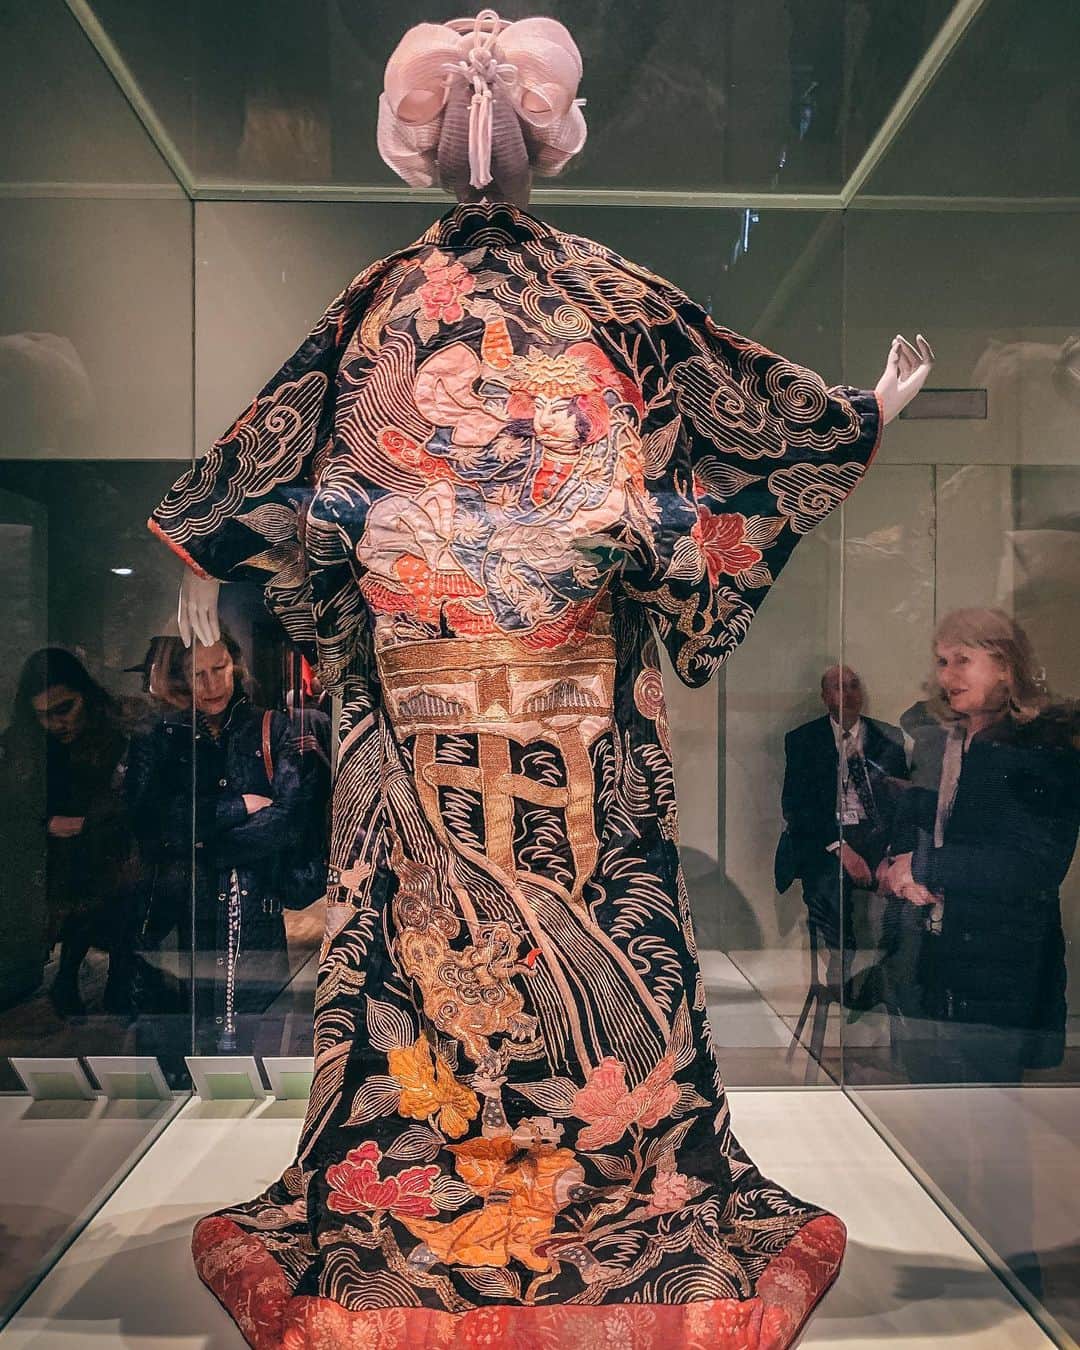 Anji SALZさんのインスタグラム写真 - (Anji SALZInstagram)「Kyoto: Kimono to Catwalk 👘 ++NEW ON THE BLOG++ I went to London to view the new exciting kimono exhibition at the @vamuseum and had an in depth tour and interview with curator Josephine @jjrout ! ☺️❤️👘 Read everything about the exhibition and the thoughts behind it - now on: 📡salz-tokyo.com (link in bio & story)  着物: 京都からキャットウォークまで❤️👘🇬🇧❤️ ++ブログ更新++ ロンドンのV&Aミュジアムの着物展示会のレポート、そしてキュレーターのJosephine Routさんに話を伺いました。 → www.salz-tokyo.com 📡💕 #kimono #kyototocatwalk」3月17日 23時14分 - salztokyo